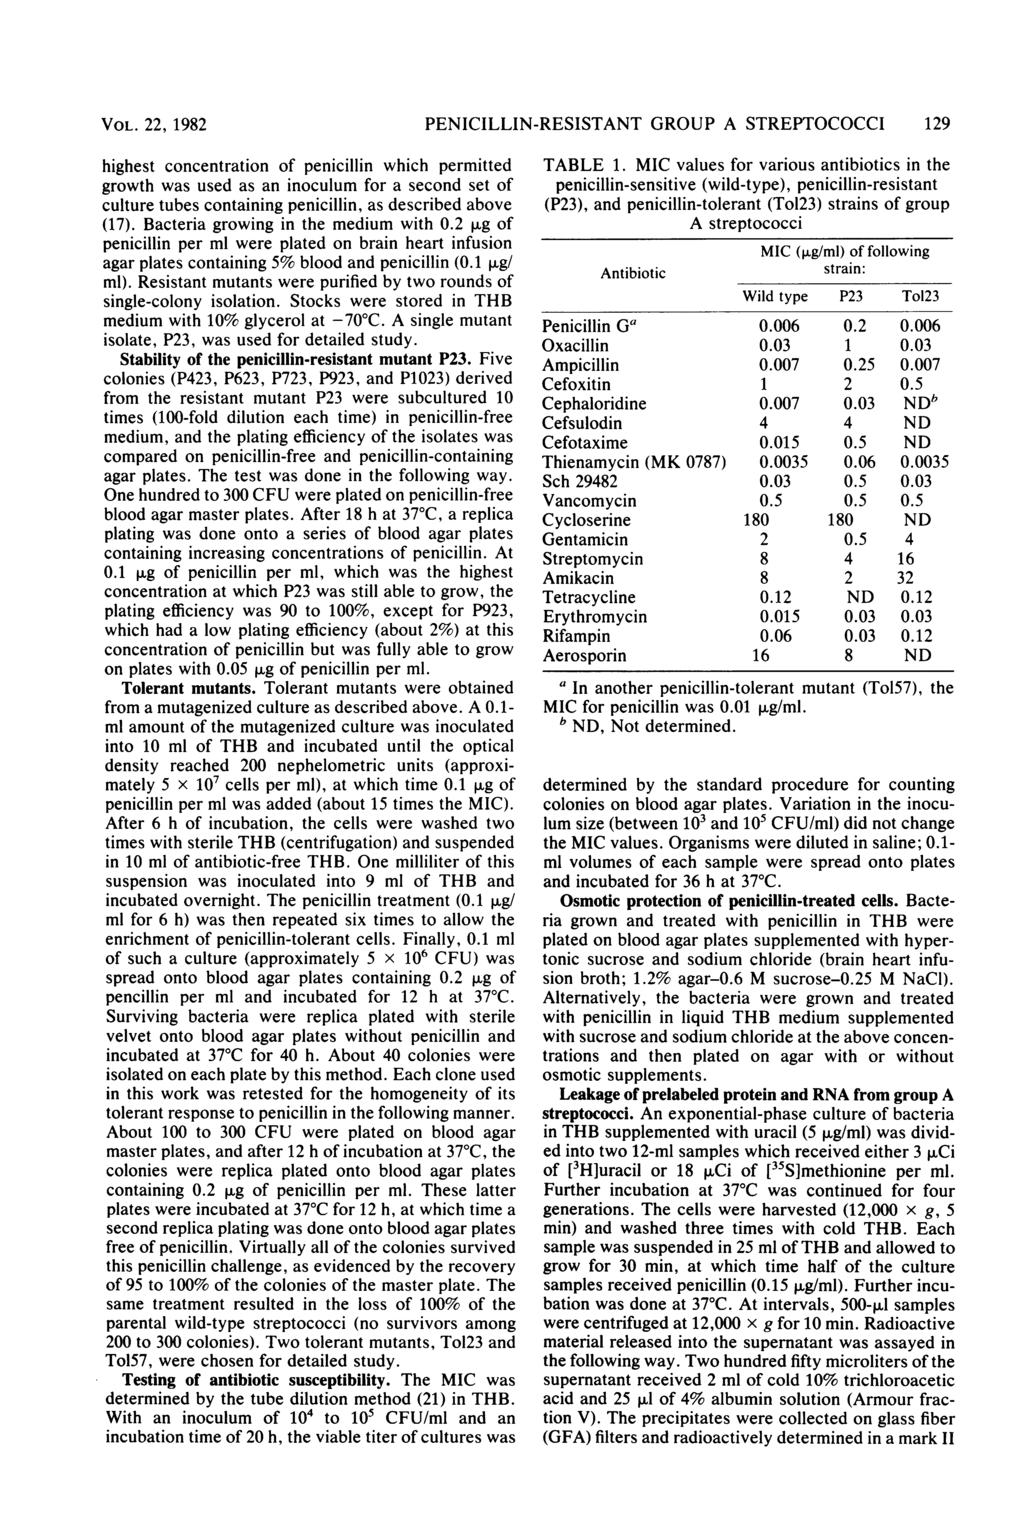 VOL. 22, 1982 highest concentration of penicillin which permitted growth was used as an inoculum for a second set of culture tubes containing penicillin, as described above (17).